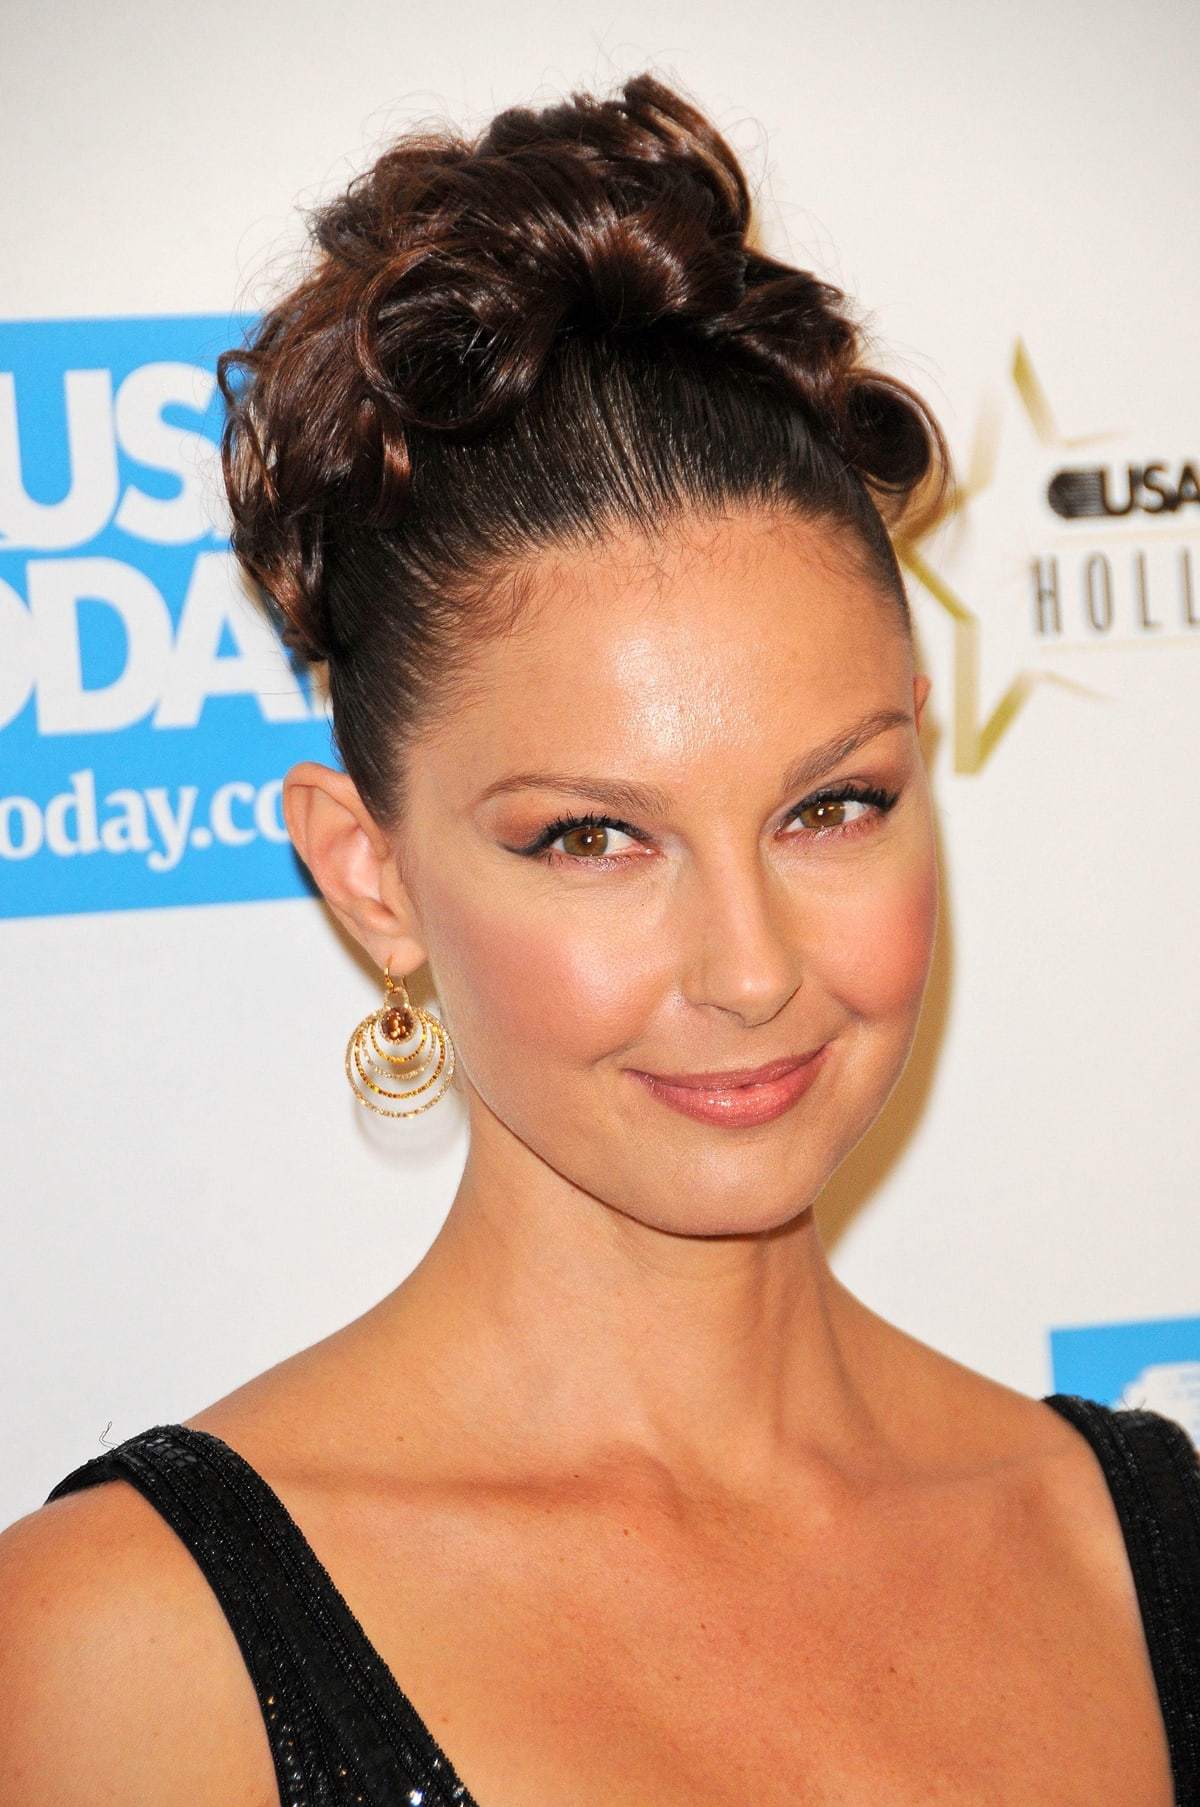 Ashley Judd received an honor for her work as a global ambassador